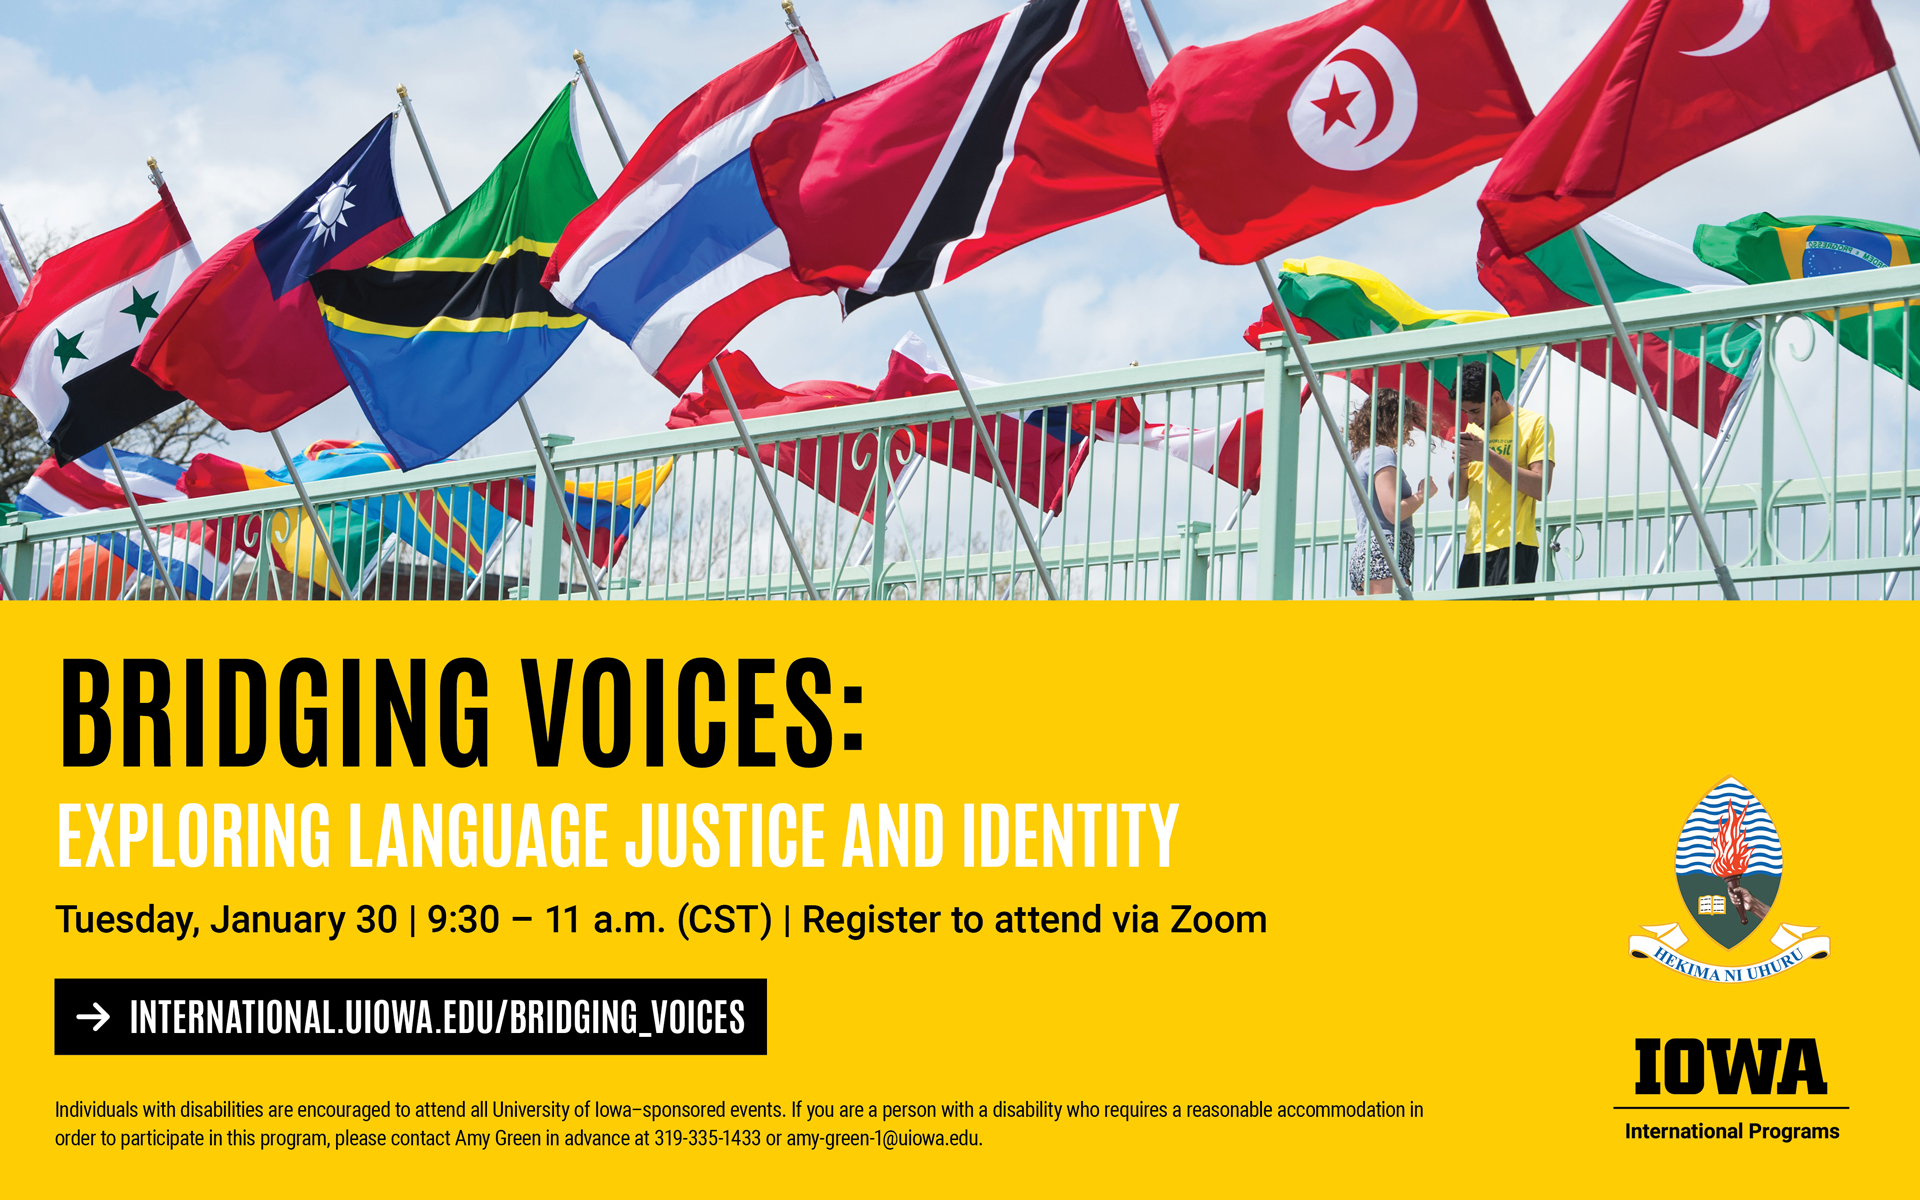 Bridging Voices: Exploring Language Justice and Identity - Tuesday, Jan. 30th from 9:30 am until 11:00 am; Register via Zoom